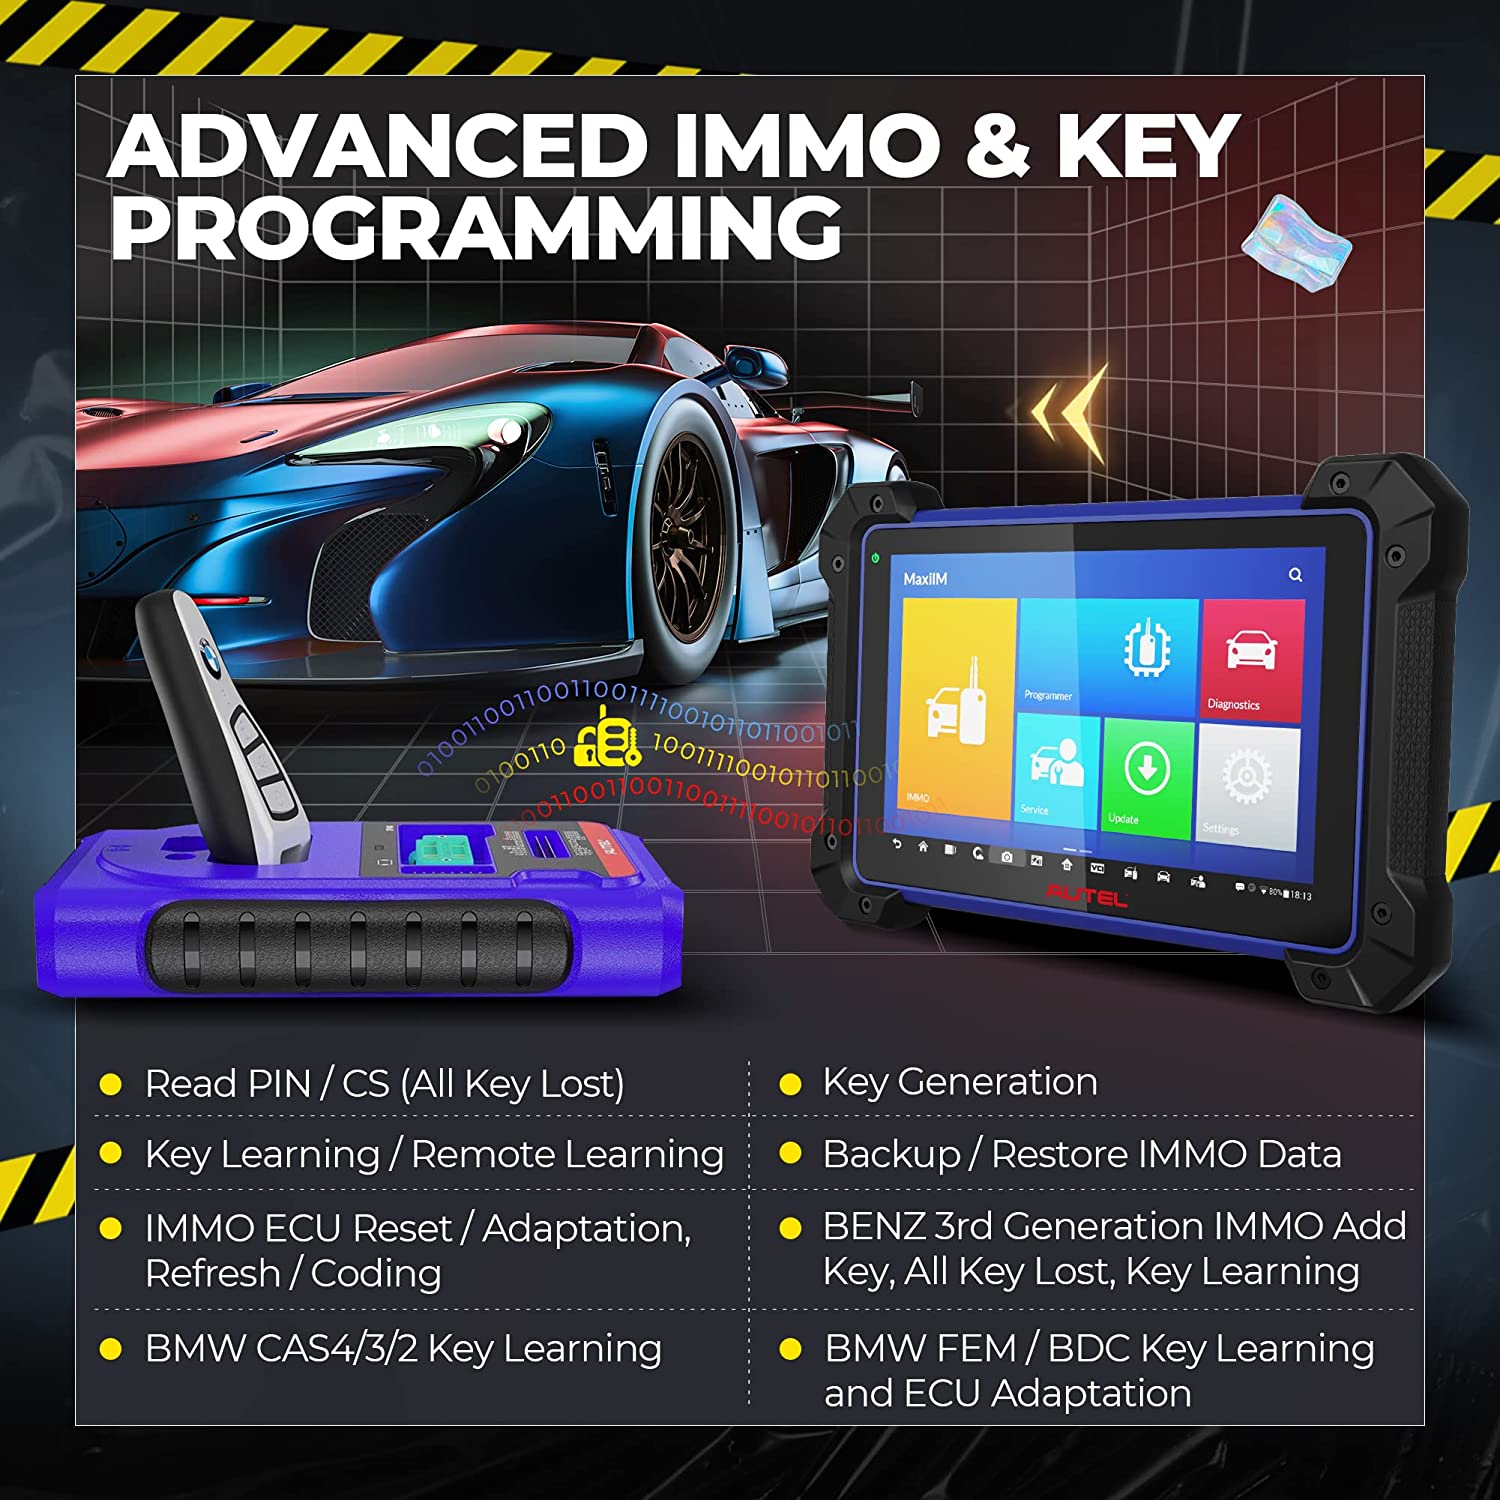 Autel MaxiIM IM608 Pro Car Diagnostic Scan Tool IMMO  Key FOB Programming  Tool with XP400 Pro Key Programmer, ECU Coding, 37+ Services, Years Free  Update